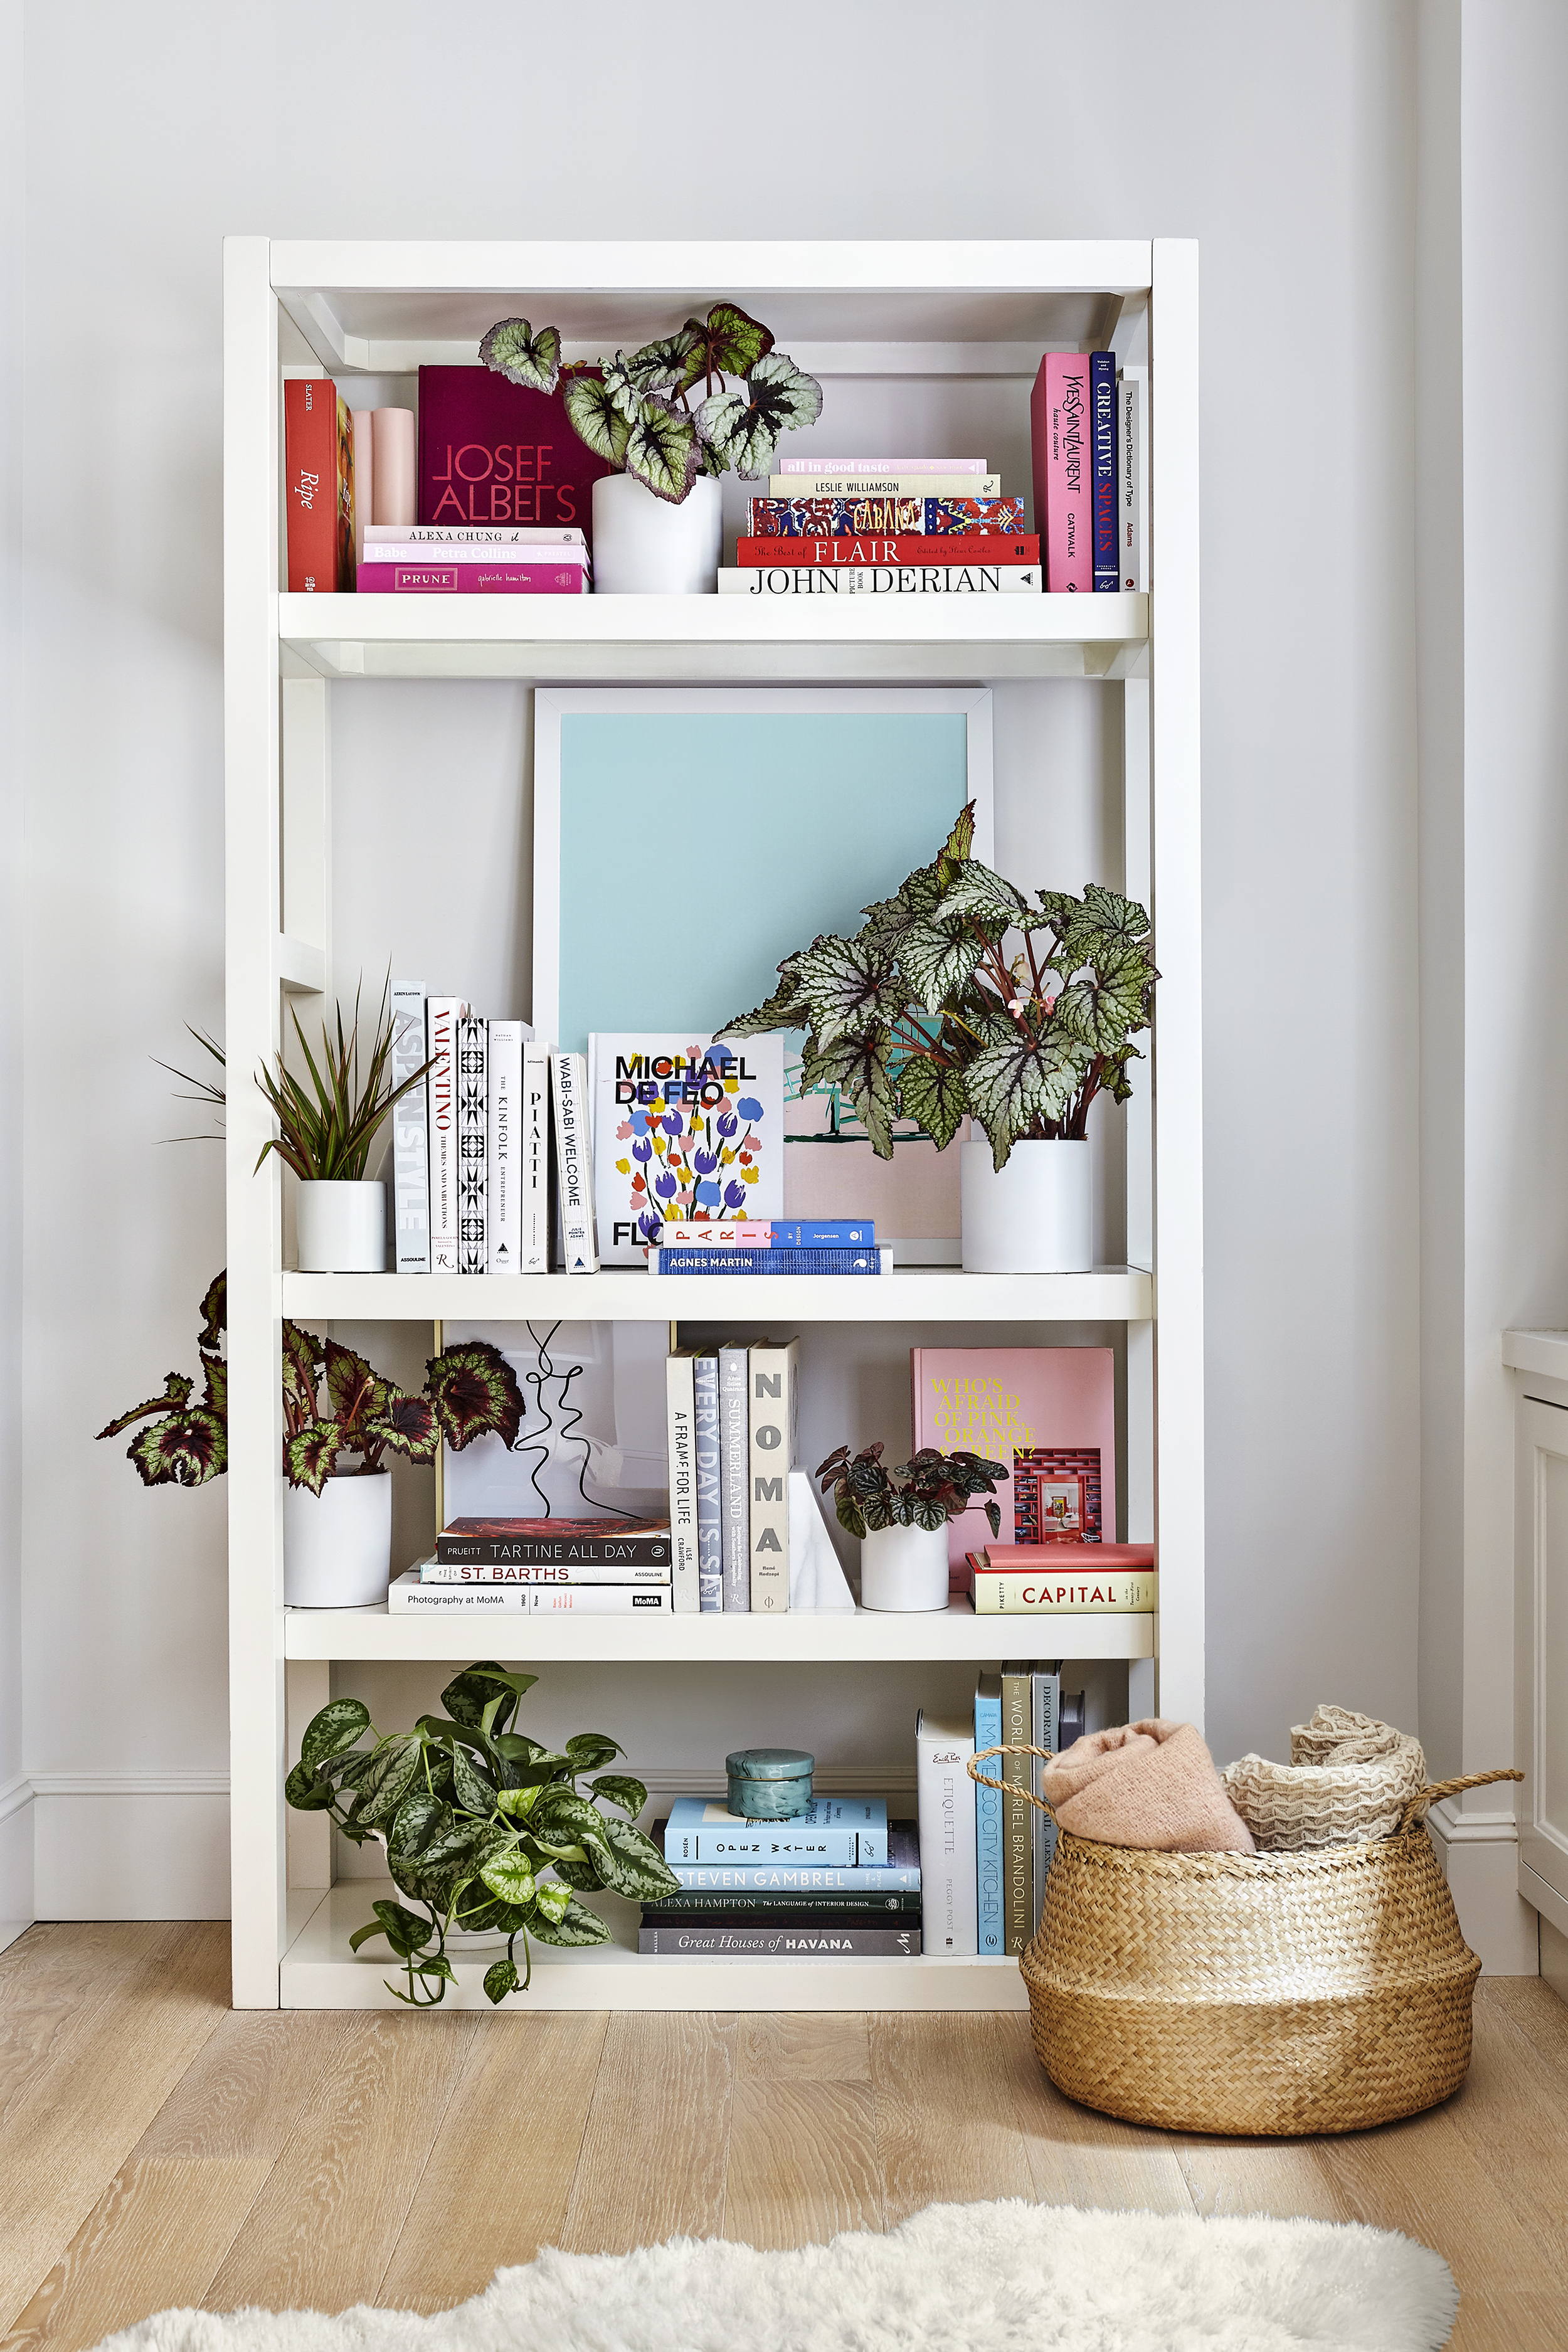 How to Decorate a Bookshelf, Using the Items on Your Wedding Registry